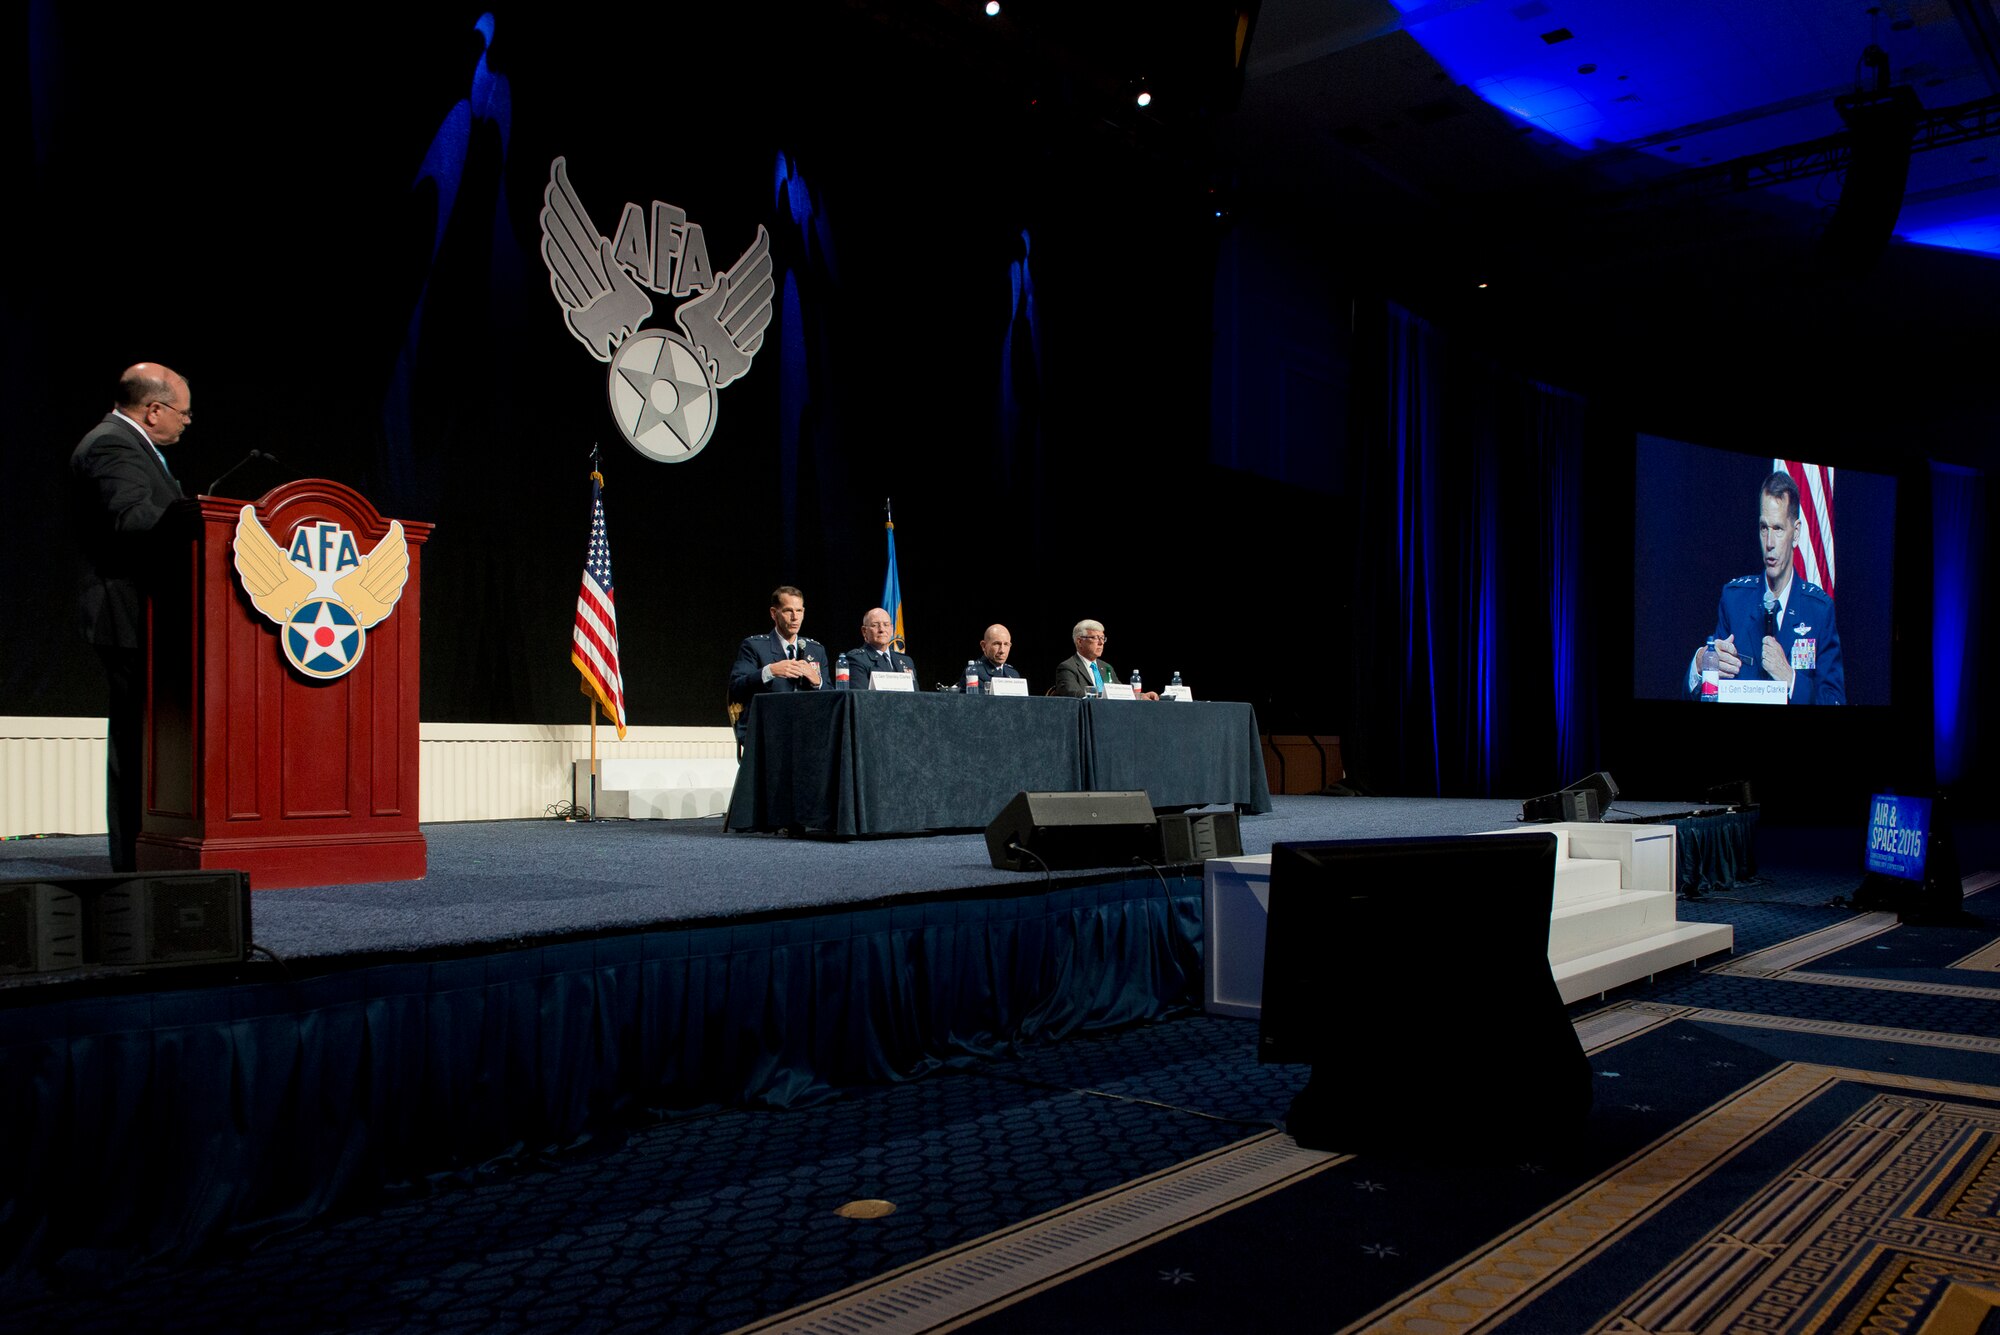 Lt. Gen. Stanley E. Clarke III, the director of the Air National Guard responds to a question during the Total Force panel at the Air Force Association's Air and Space Conference and Technology Exposition in National Harbor, Md., Sept. 16, 2015. The other members of the panel were Lt. Gen James Jackson, commander of the Air Force Reserve Command and chief of Air Force Reserves, Lt. Gen James Holmes, deputy chief of staff for Strategic Plans and Requirements and Daniel Sitterly, principal deputy Assistant Secretary of the Air Force for Manpower and Reserve Affairs. (U.S. Air National Guard photo/Master Sgt. Marvin R. Preston/Released)